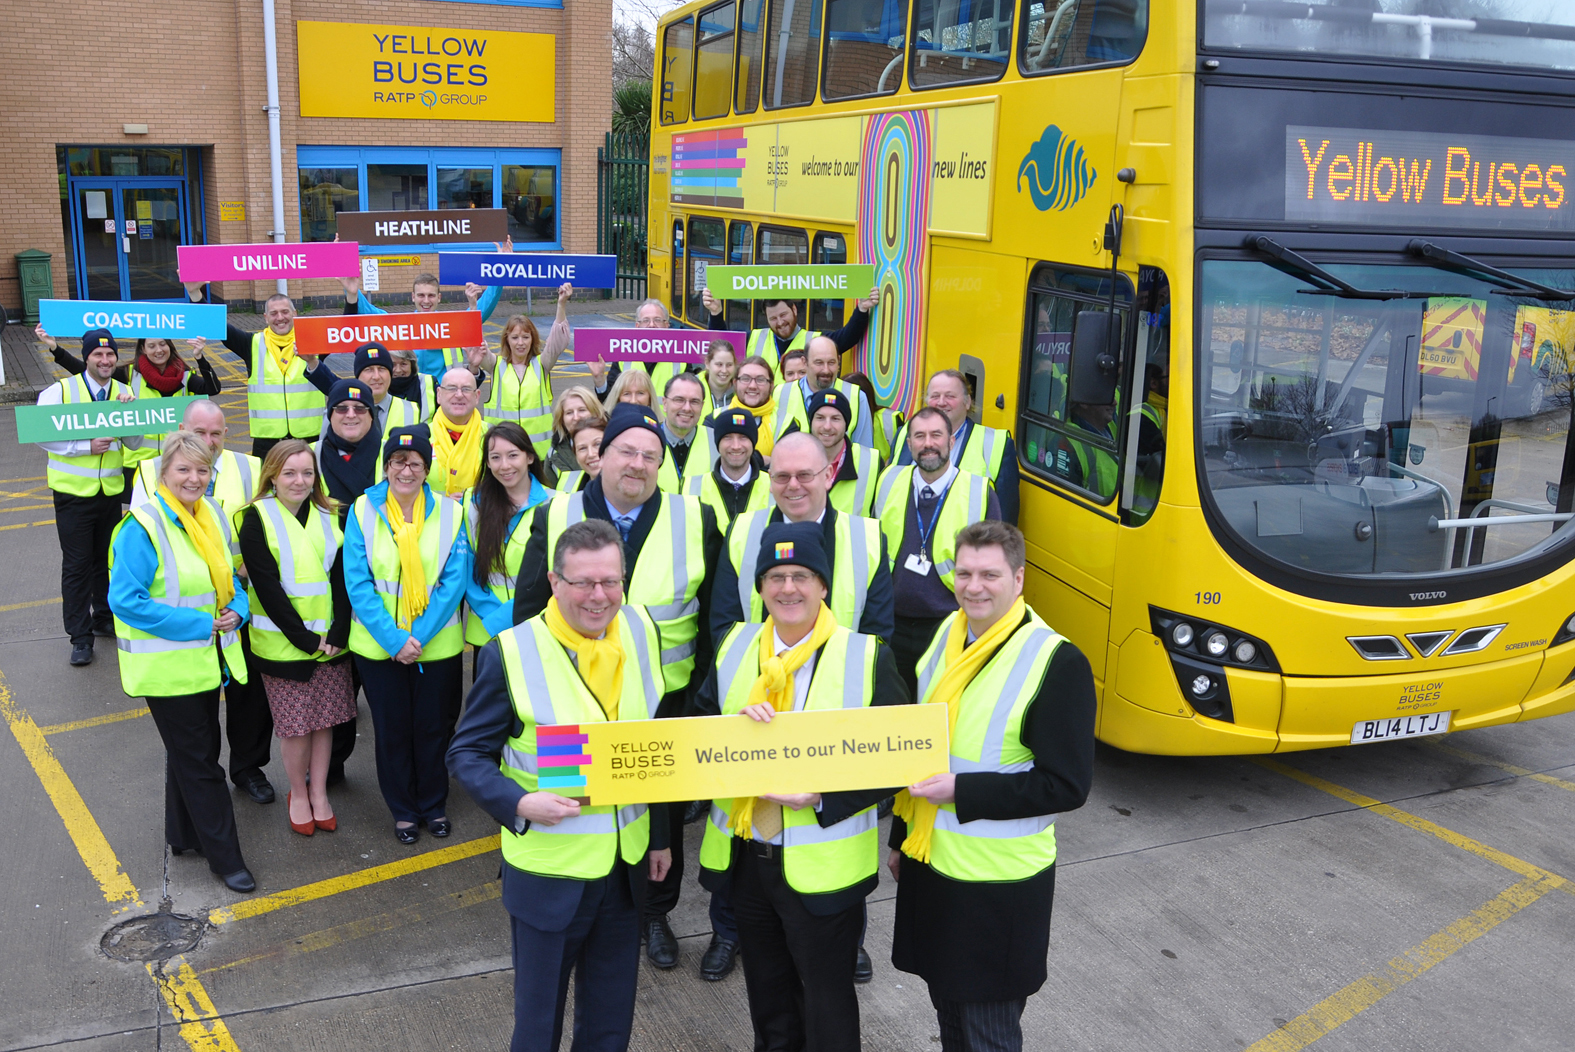 Yellow Buses passengers ‘confused’ by new routes